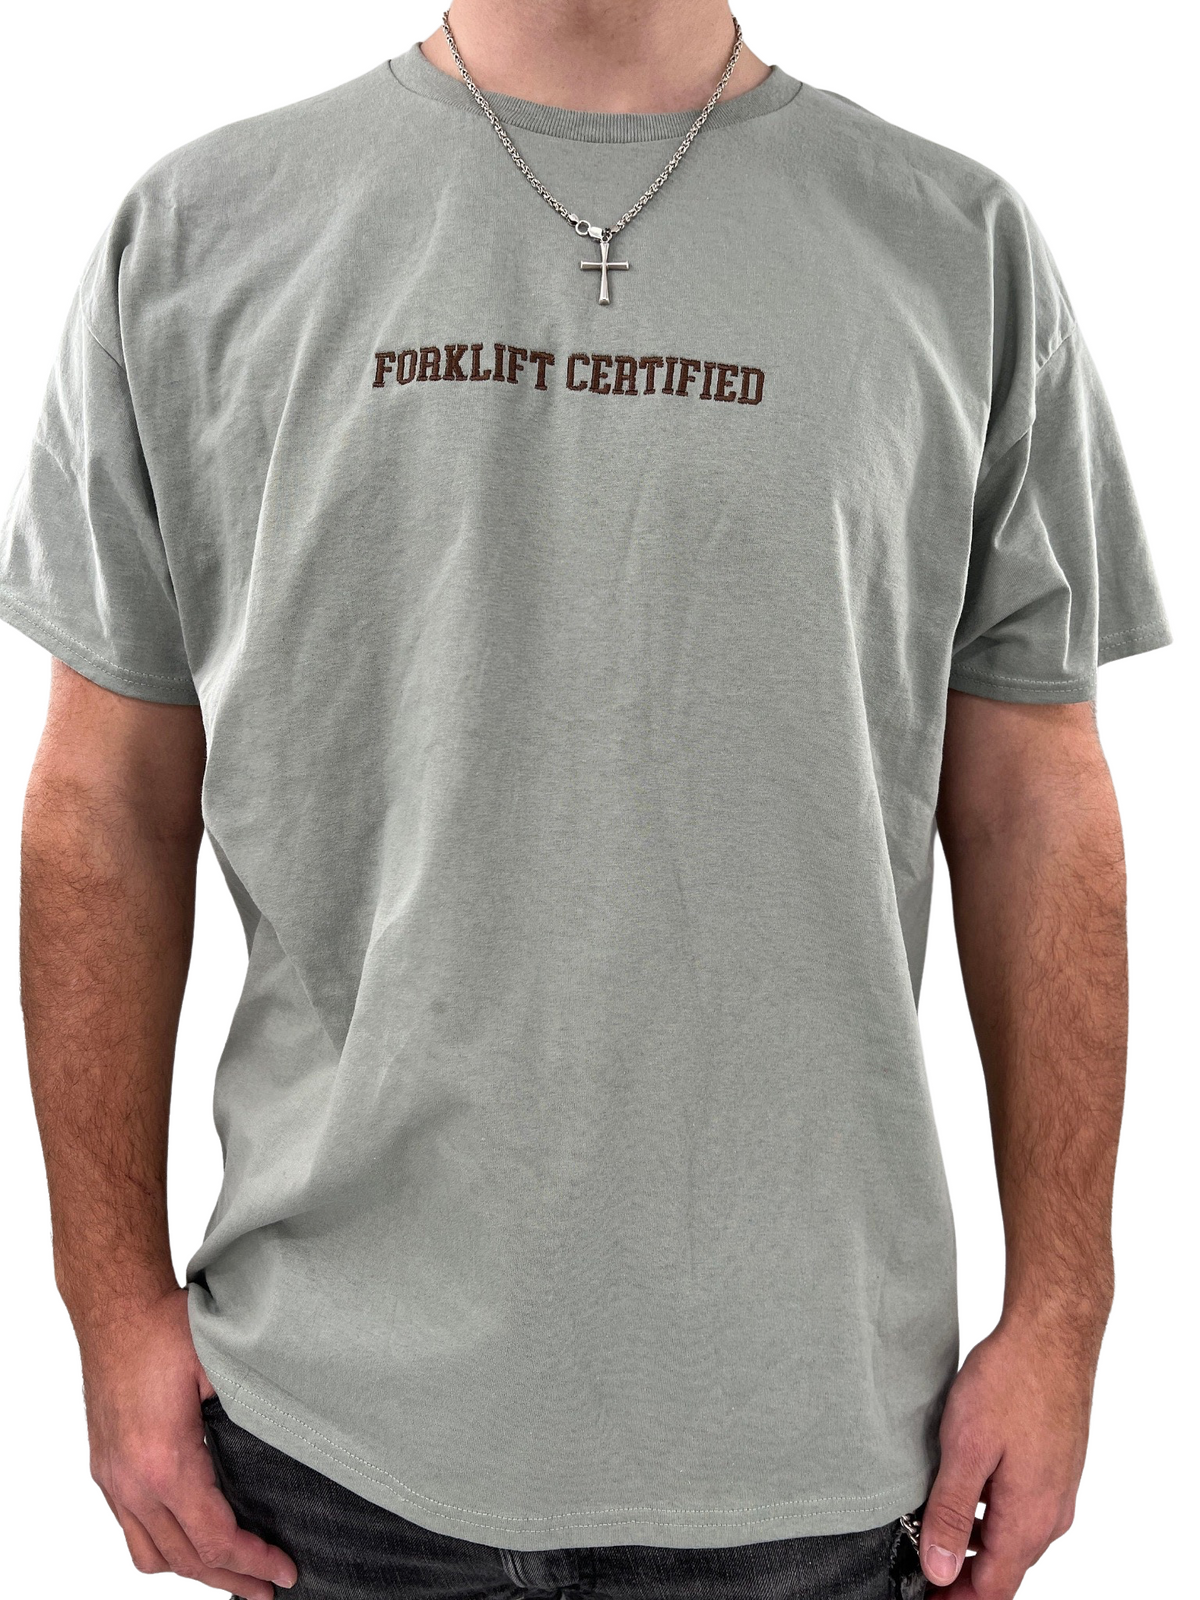 Forklift Certified Embroidered Shirt